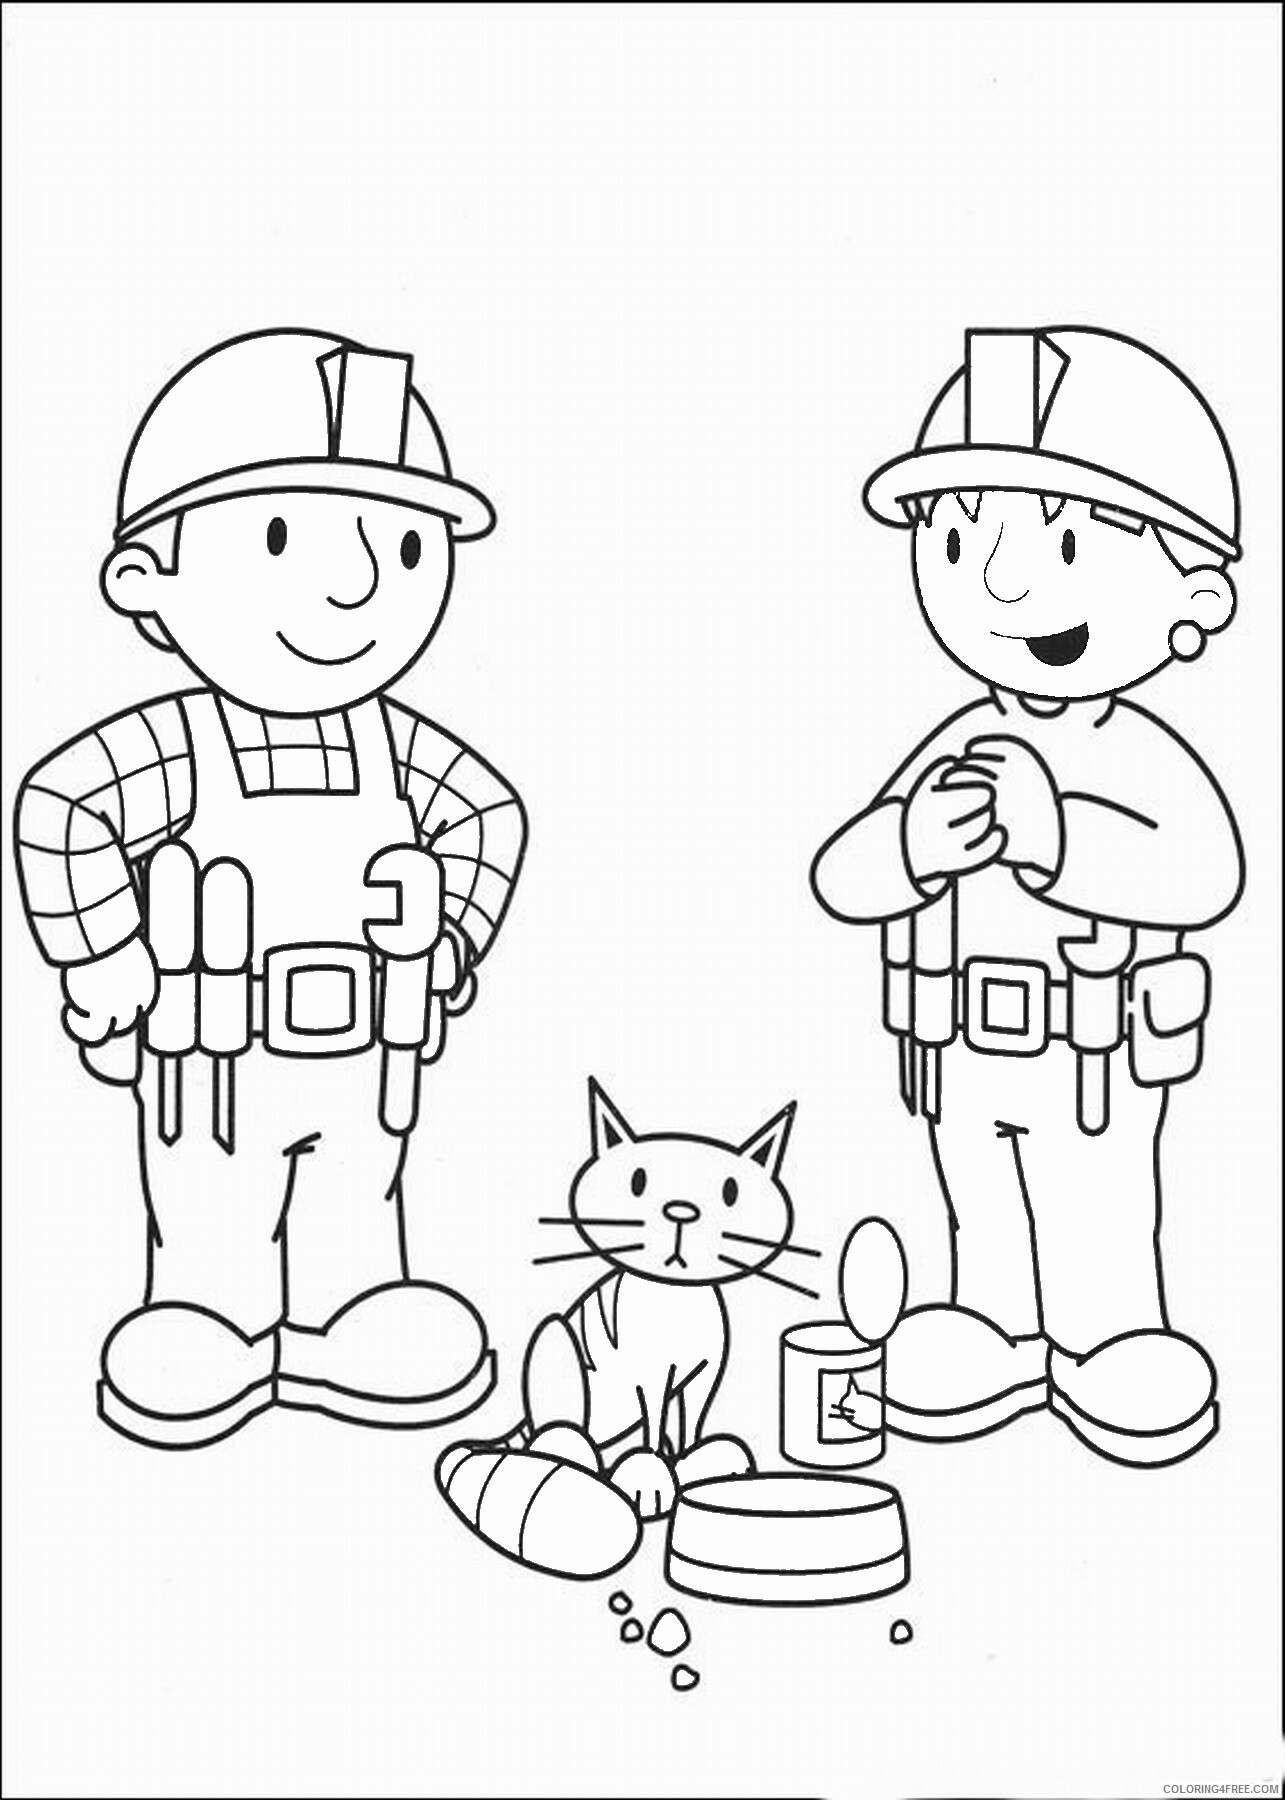 Bob the Builder Coloring Pages TV Film bob the builder_06 Printable 2020 00956 Coloring4free